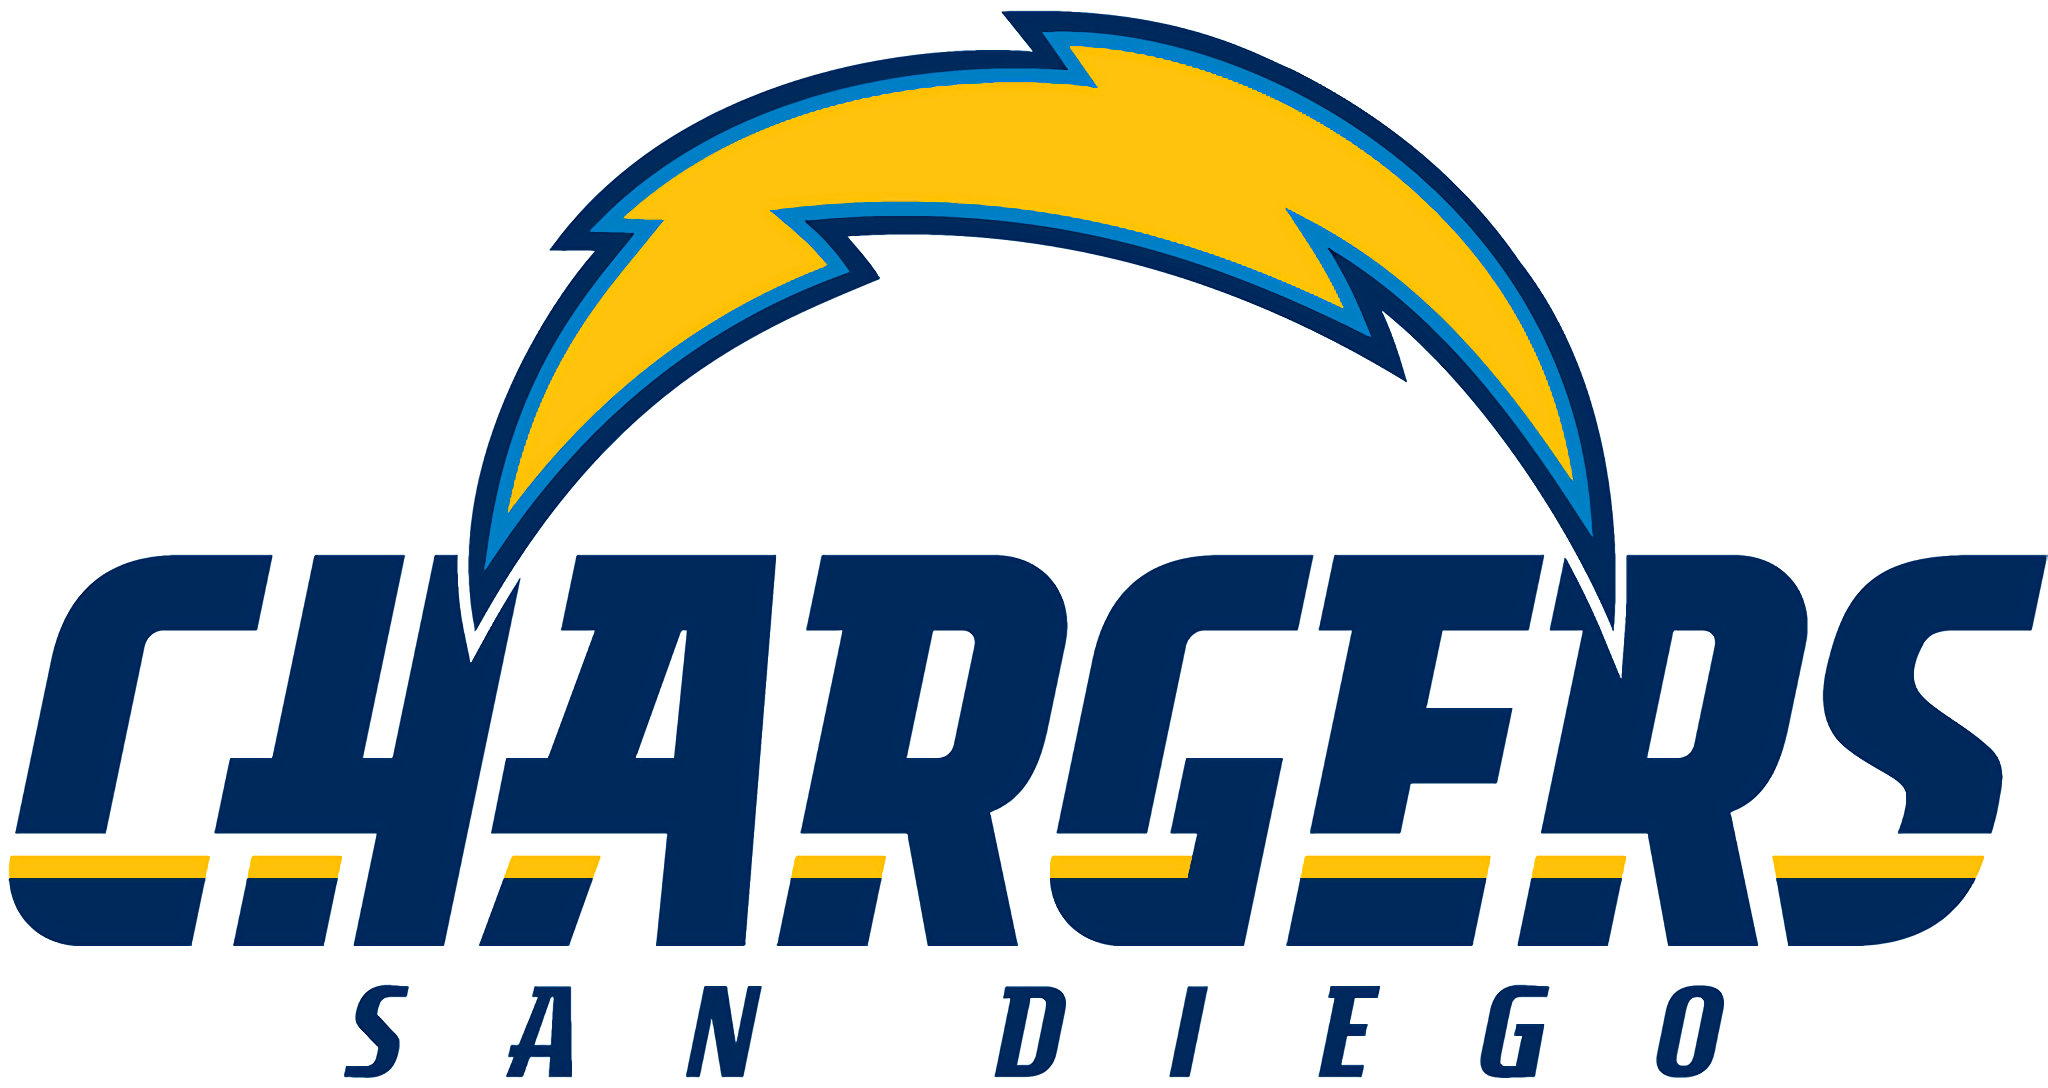 Los Angeles Chargers Full HD Wallpaper